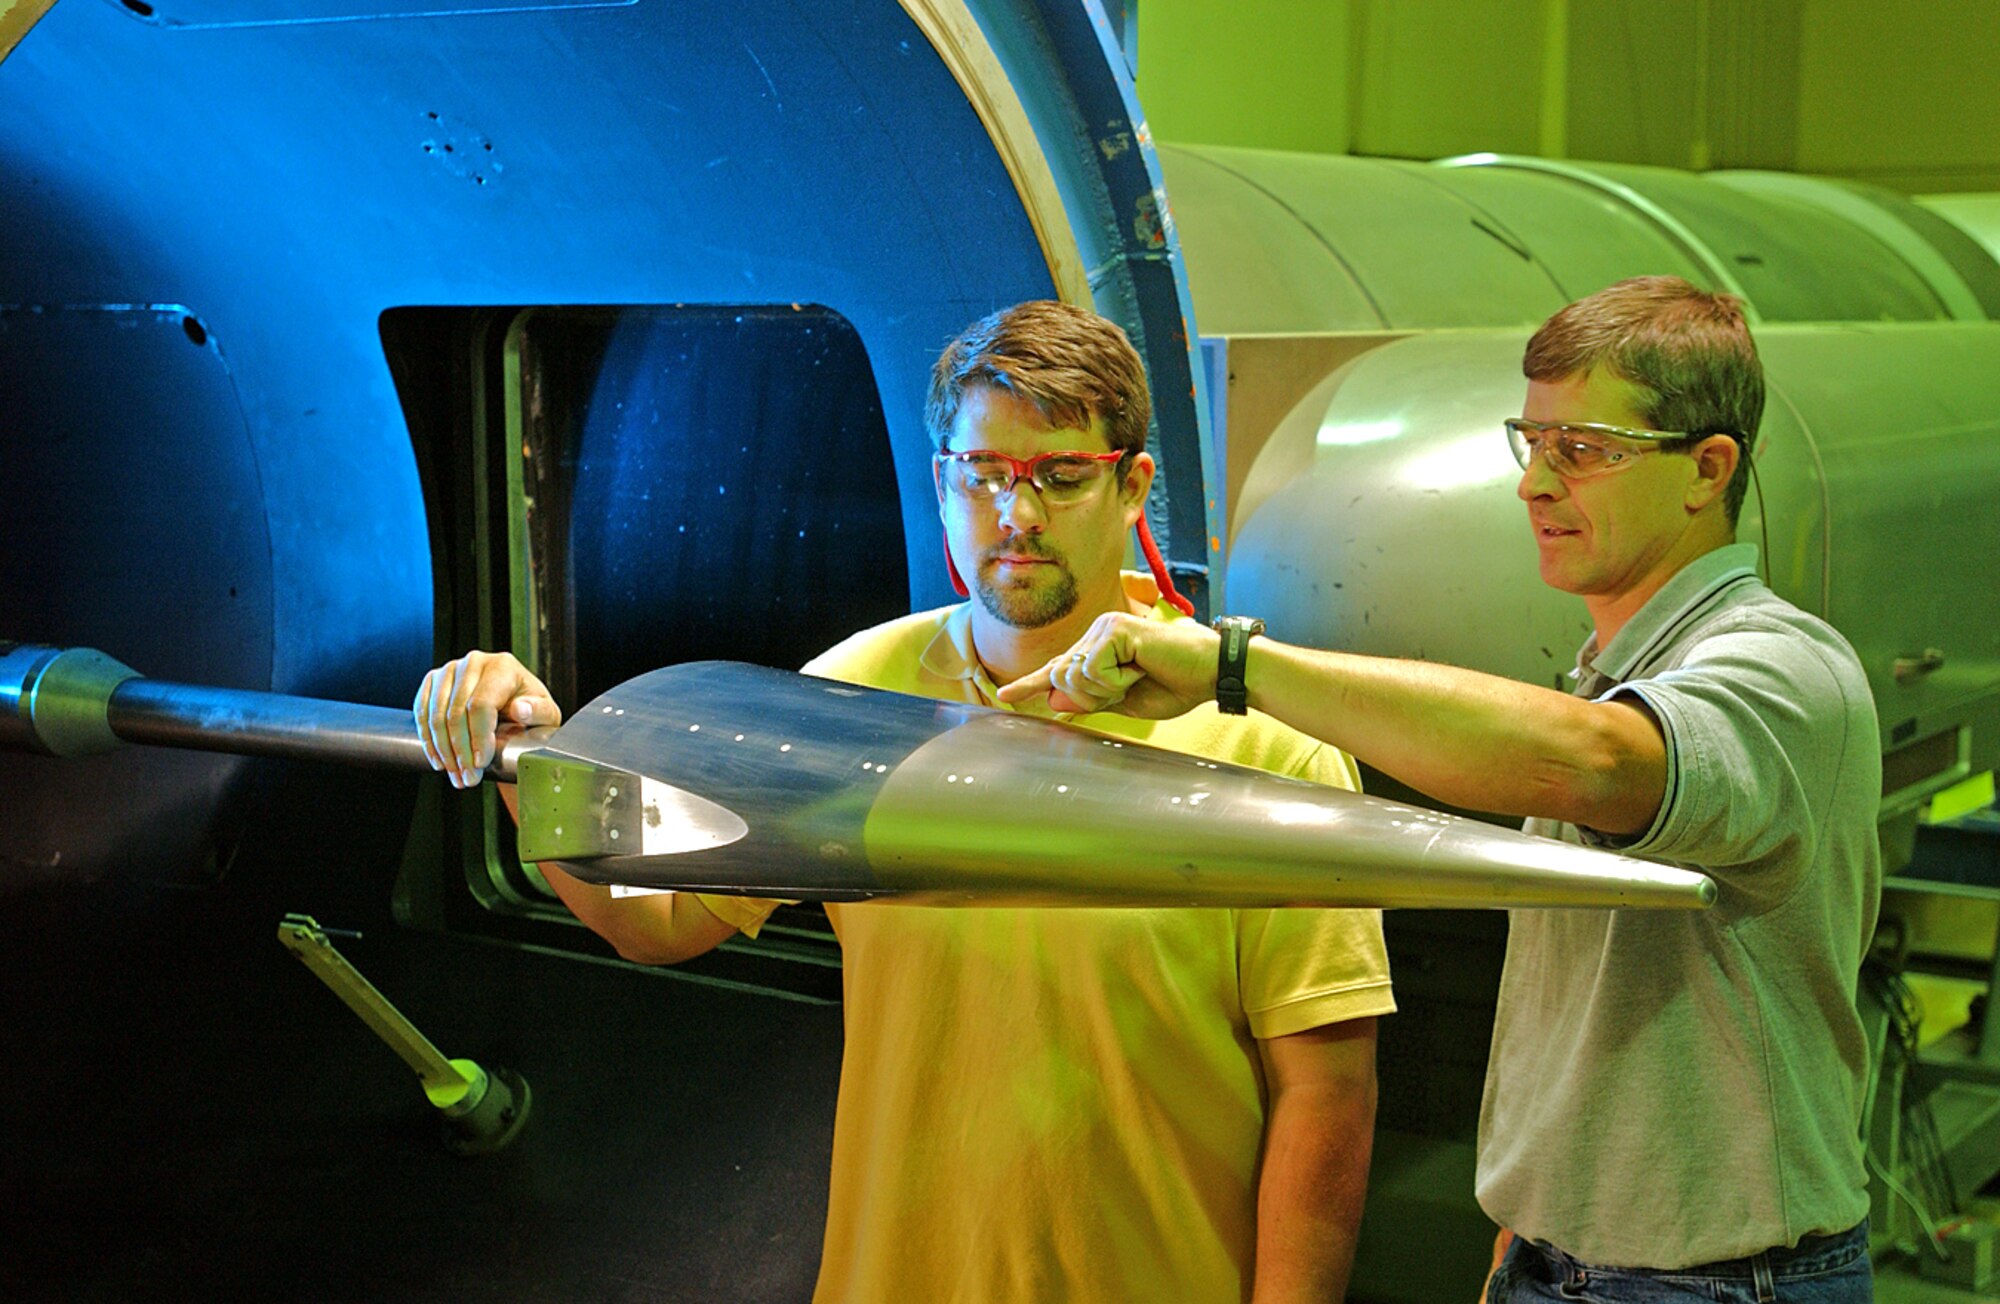 ARNOLD AIR FORCE BASE, Tenn. (AFPN) -- Test engineers Joe Norris (left) and John Lafferty ready a Hypersonic Technology Vehicle-1 model prior to a Hypervelocity Wind Tunnel 9 operation. (U.S. Air Force photo)